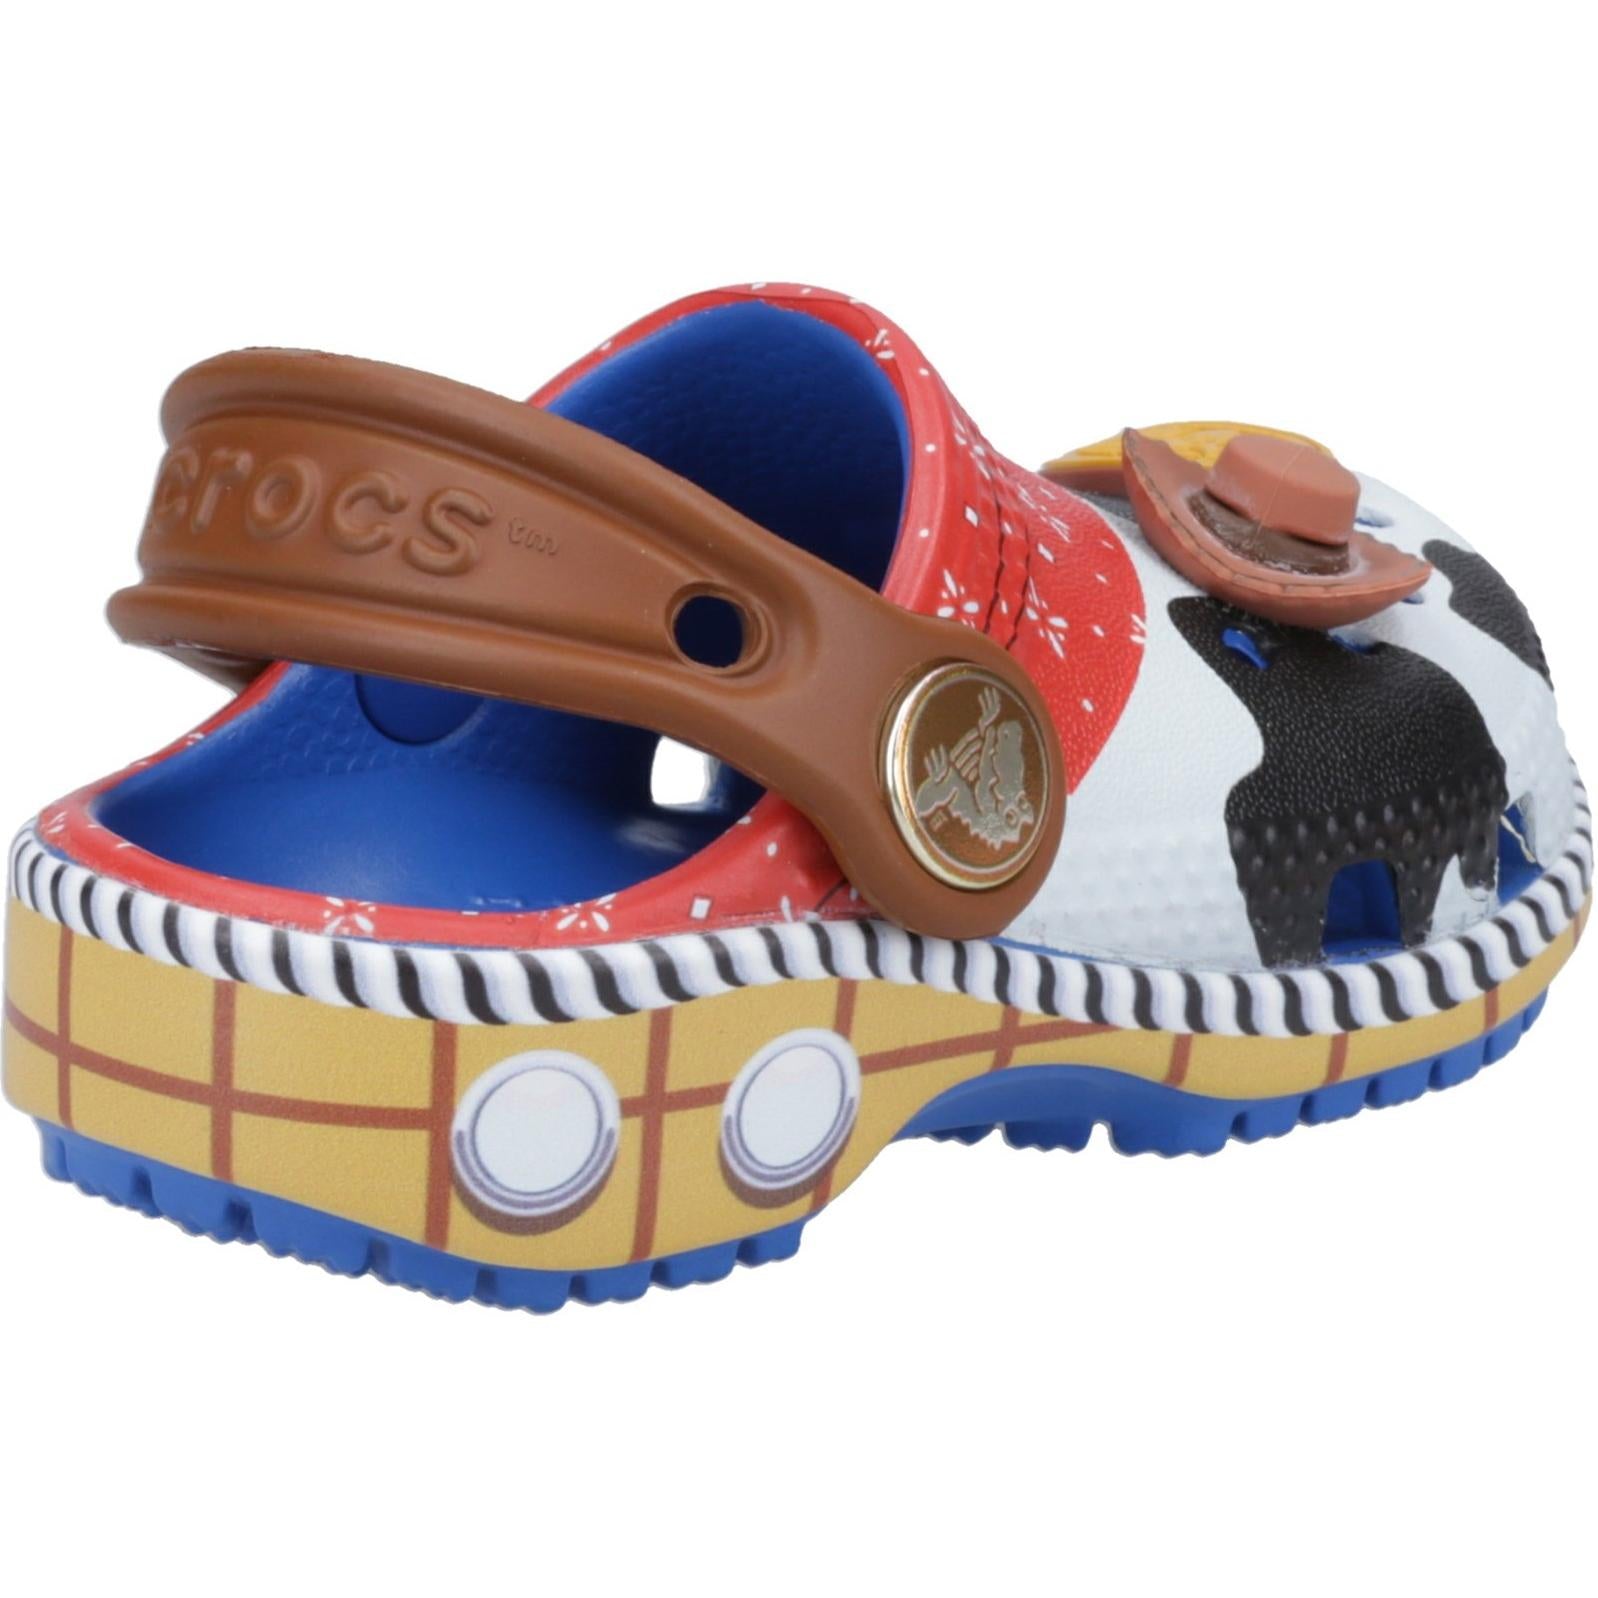 Crocs Toy Story Woody Classic Clog Shoes